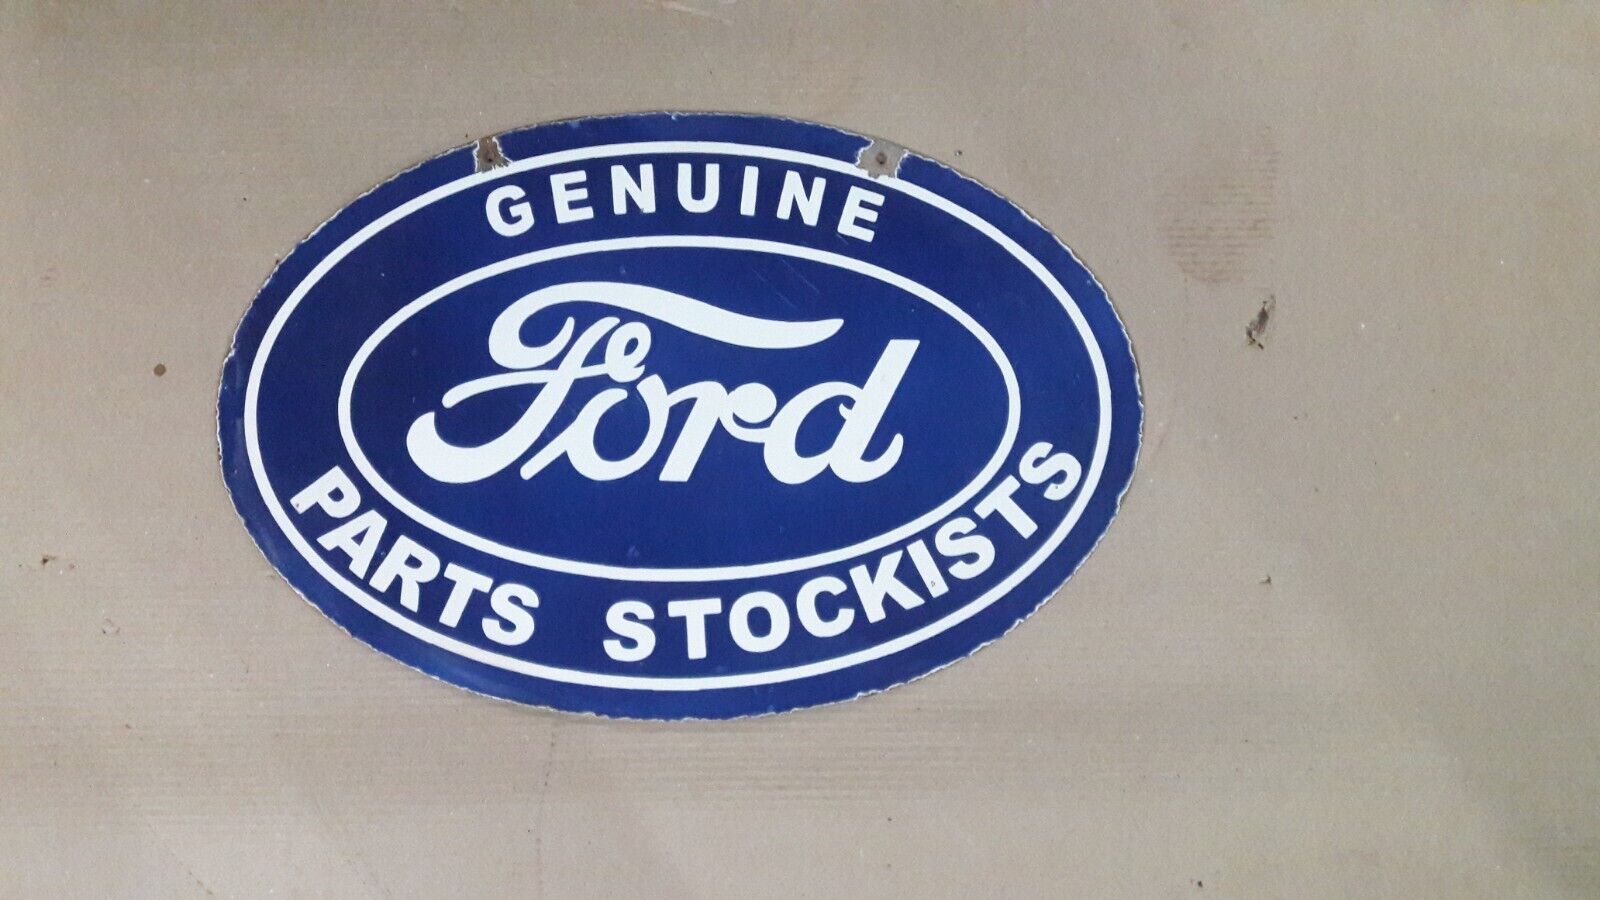 GENUINE FORD PARTS PORCELAIN ENAMEL SIGN 36X24 INCHES DOUBLE SIDED